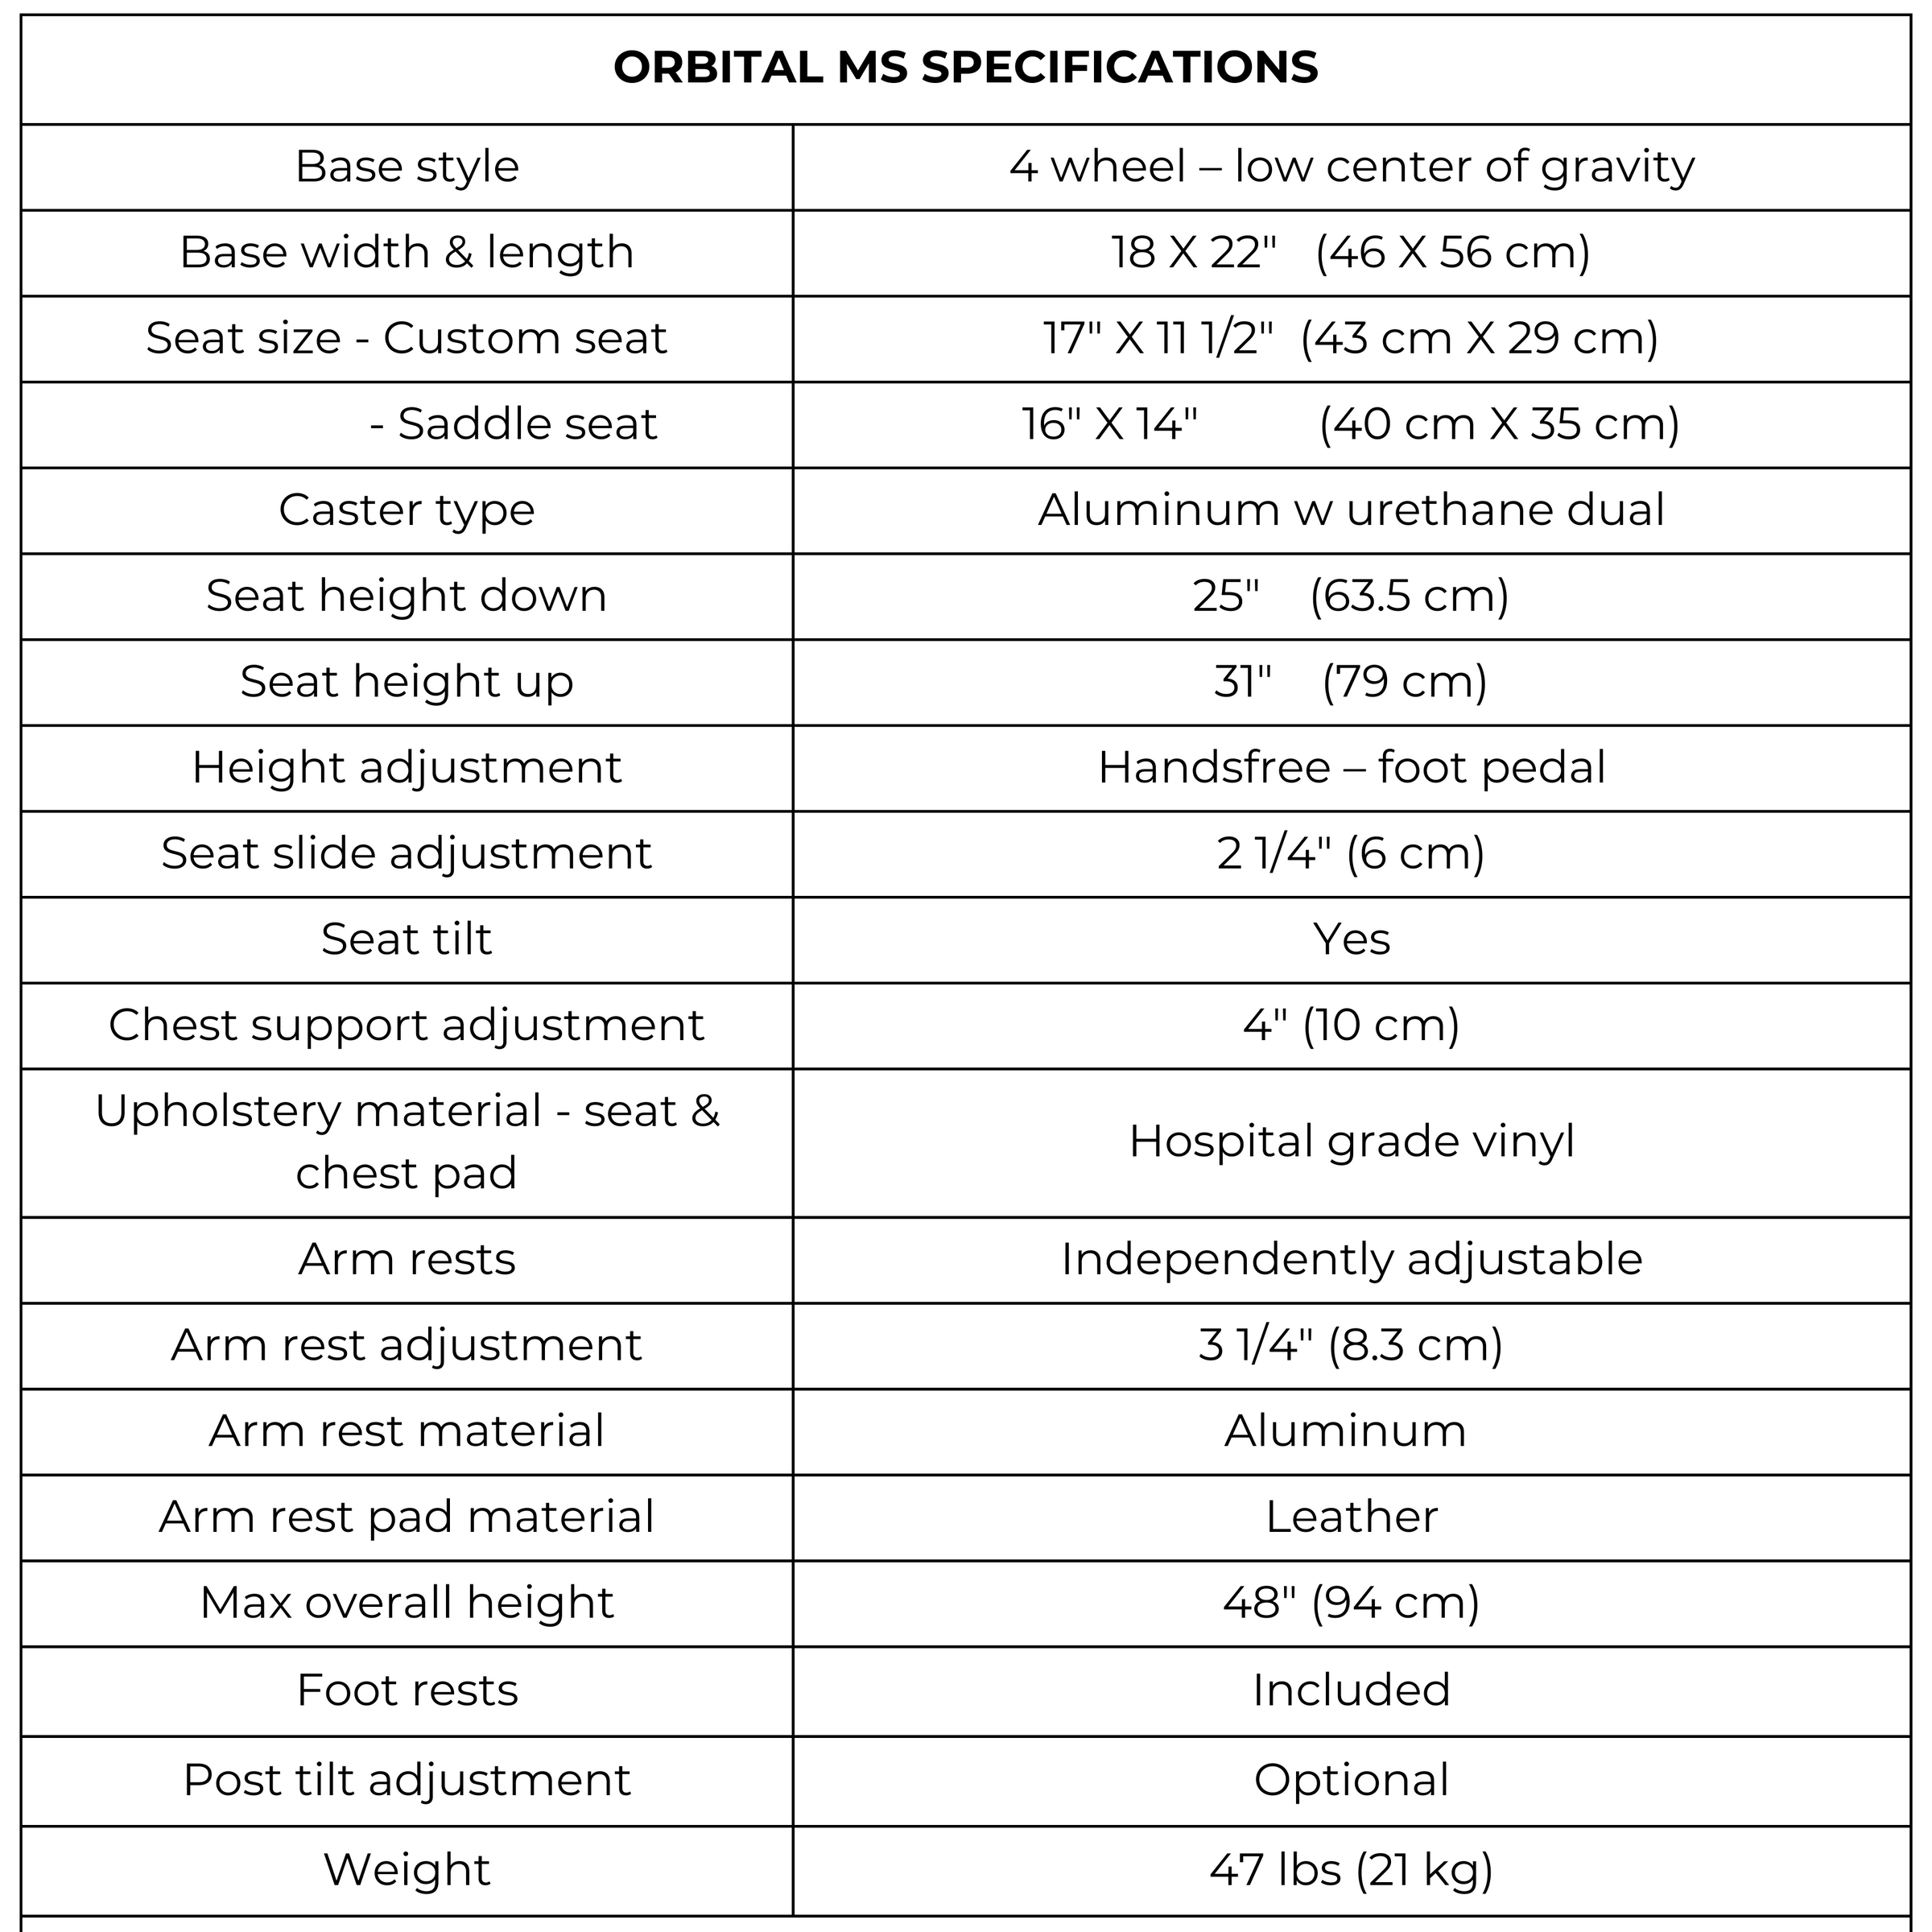 Orbital Microsurgical ergonomic chair specifications for surgeons